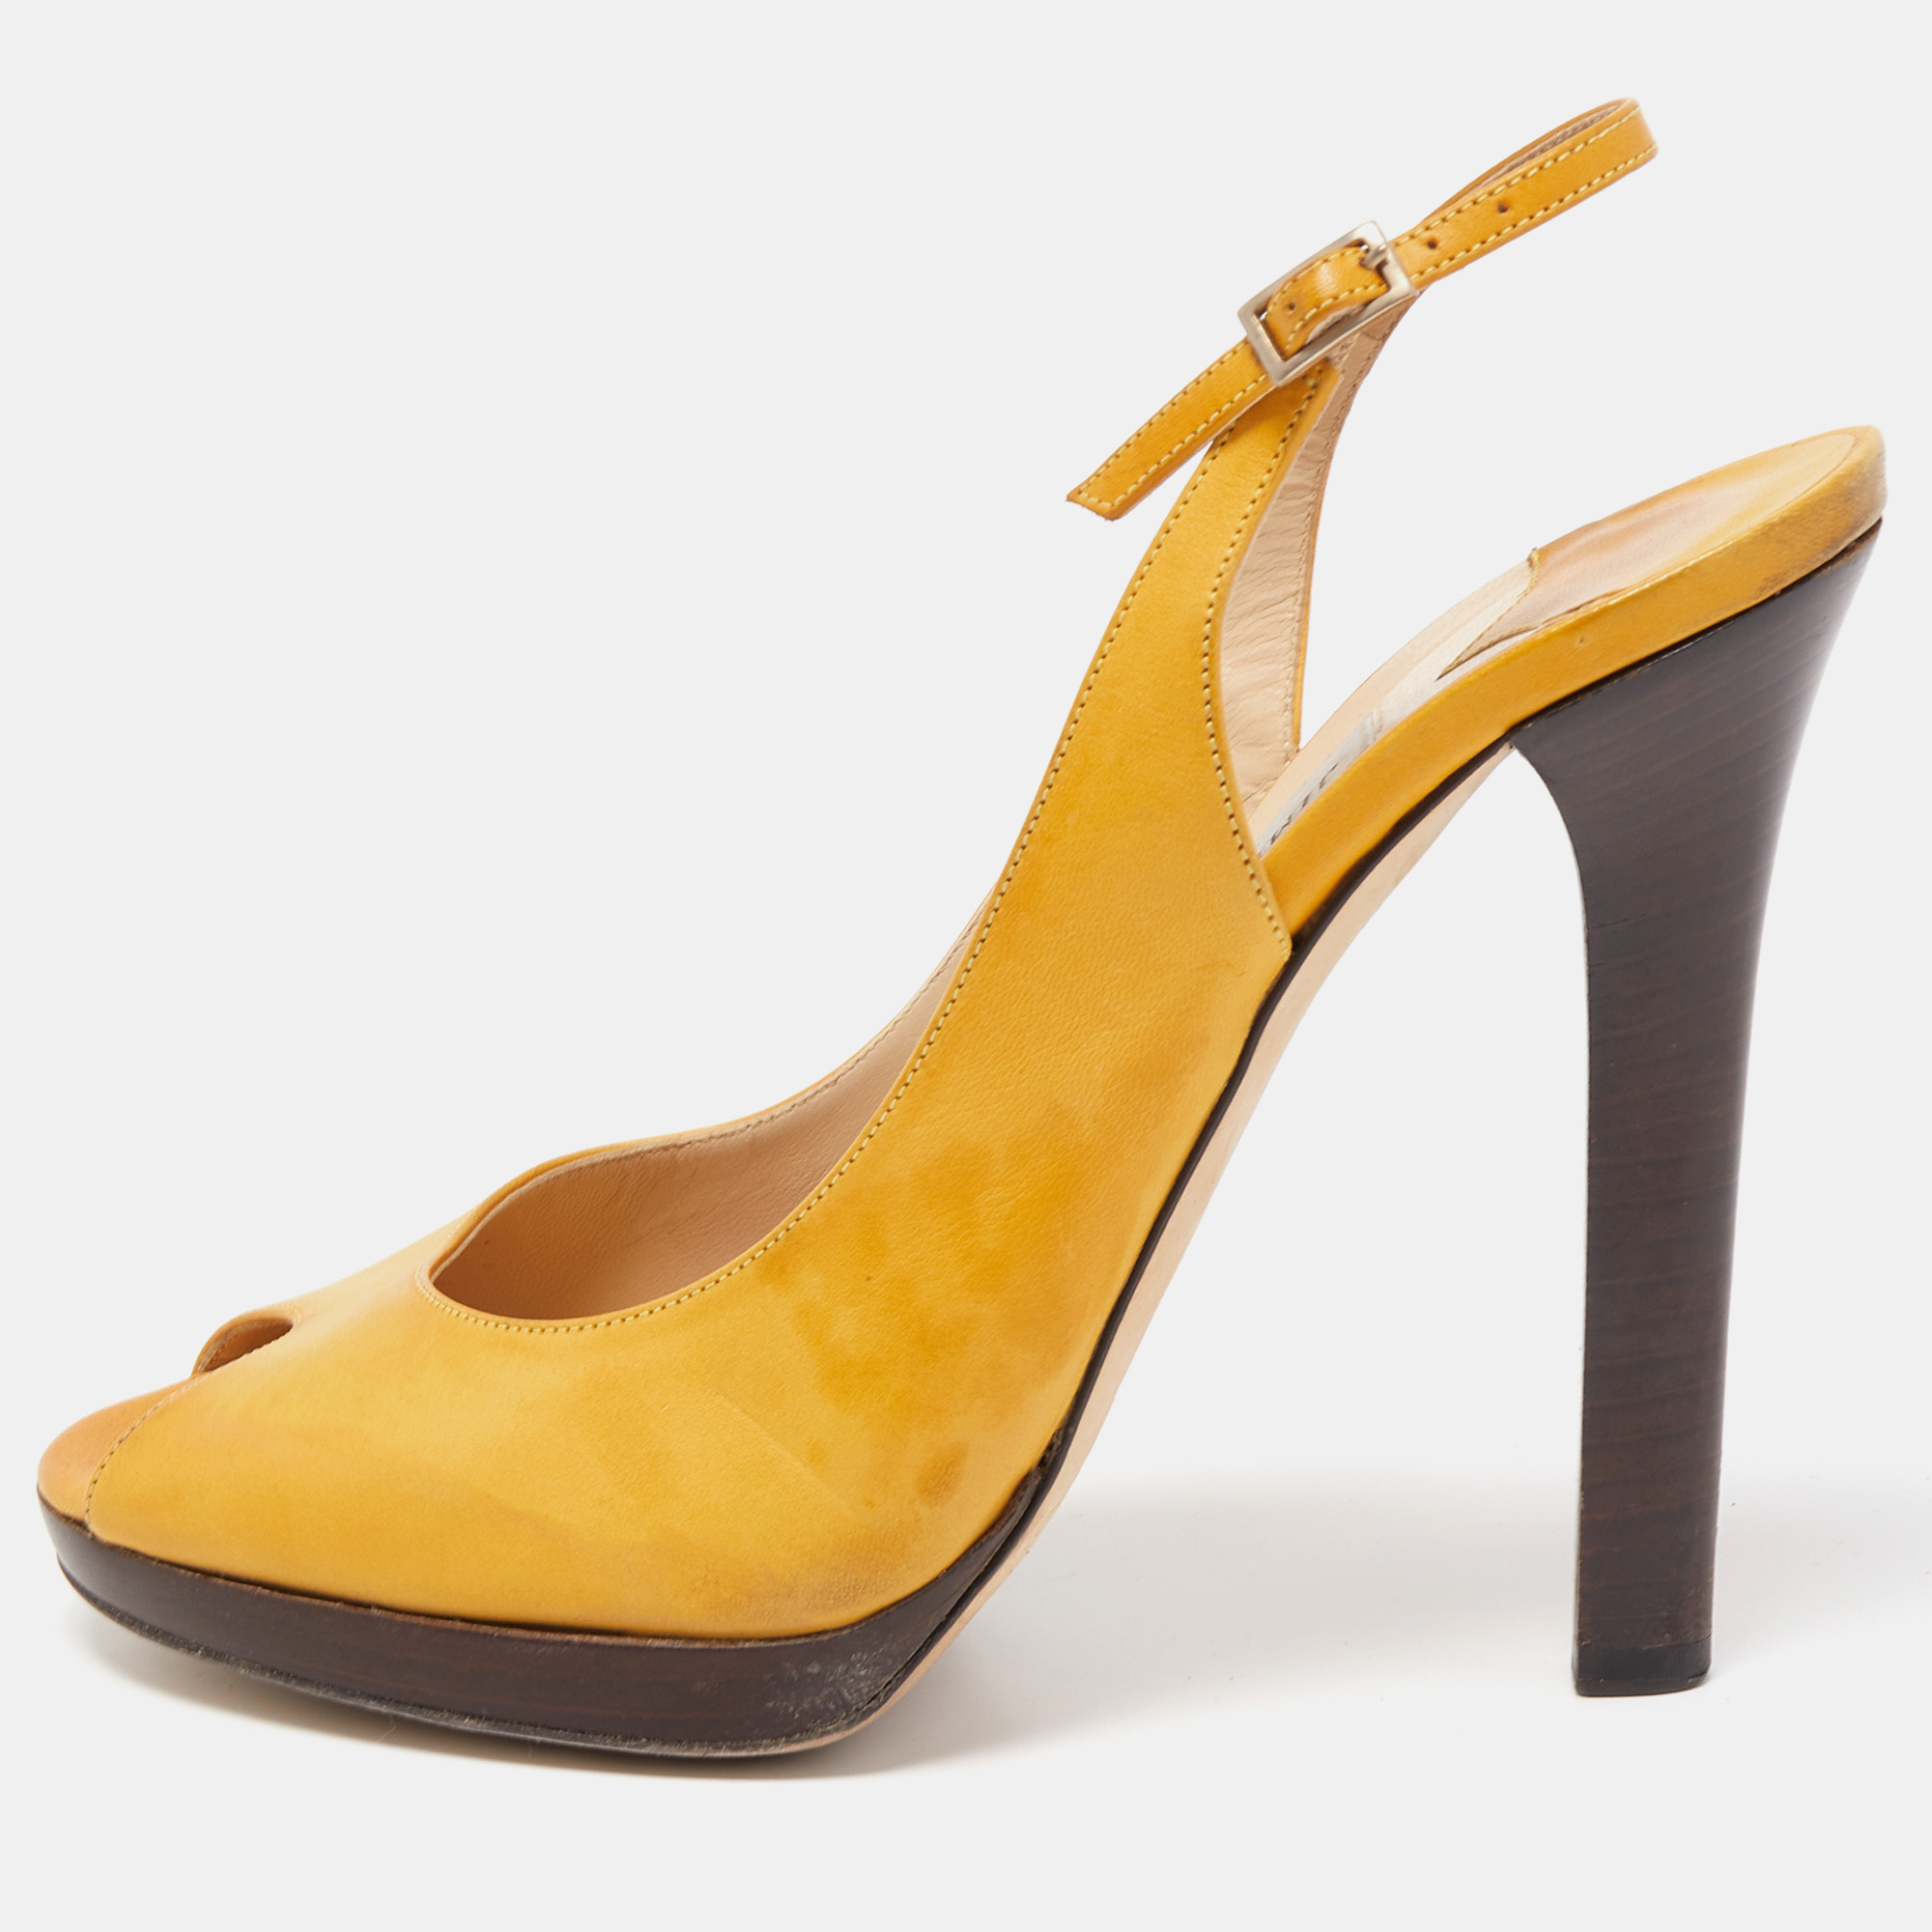 Pre-owned Jimmy Choo Yellow Leather Peep Toe Slingback Pumps Size 39.5